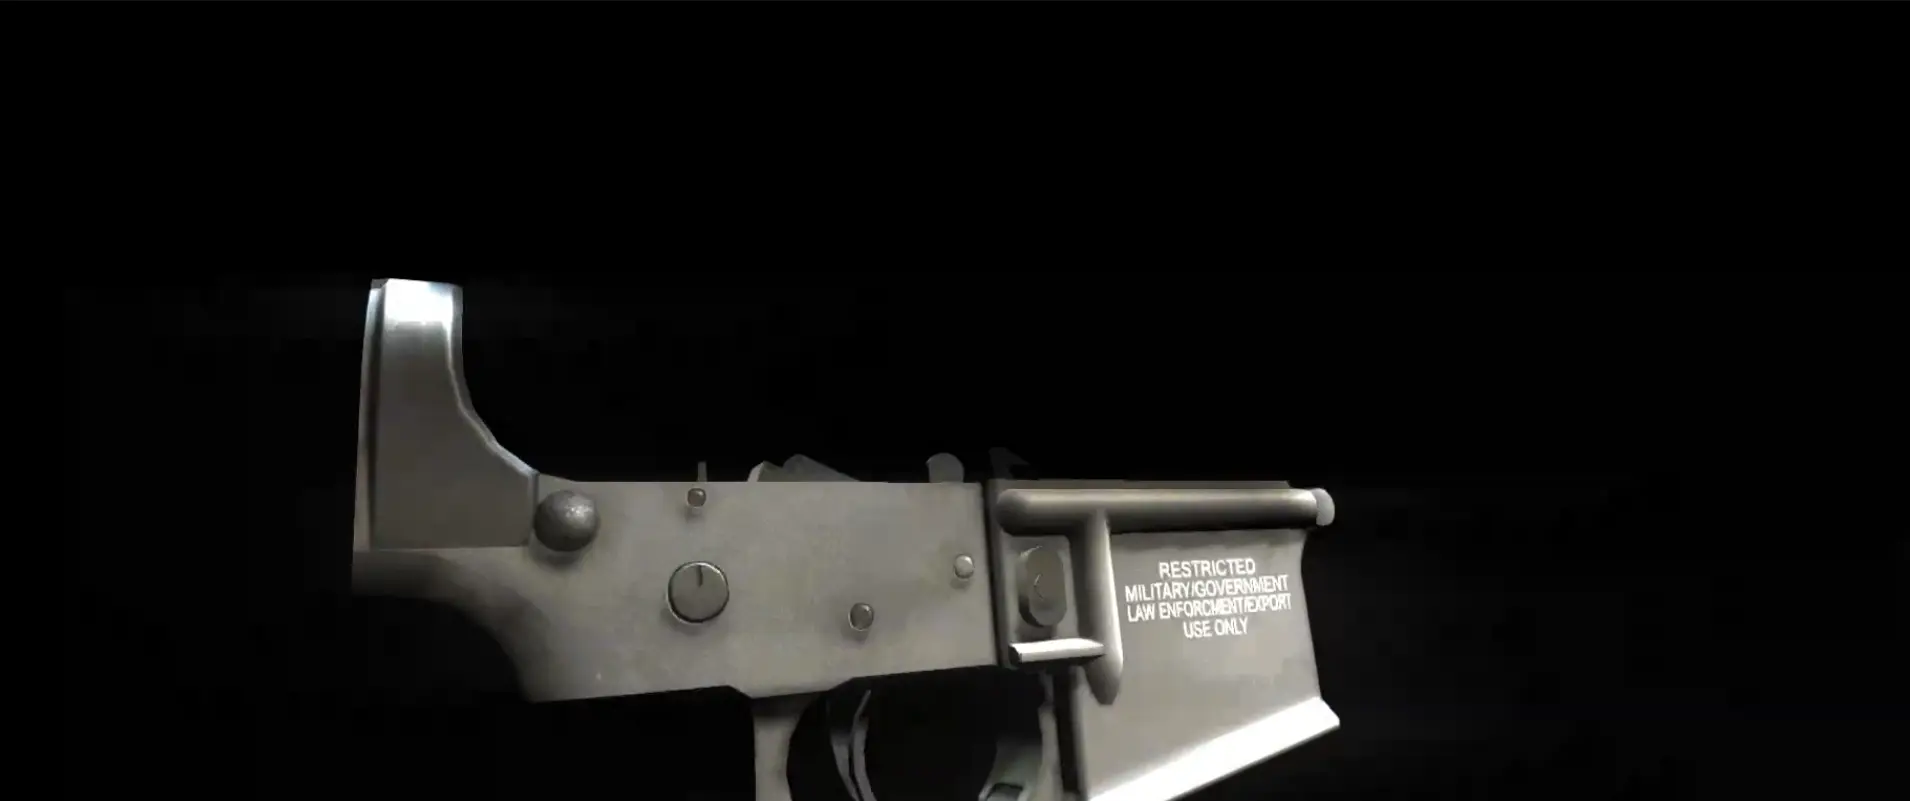 Video Banner - New to Firearms